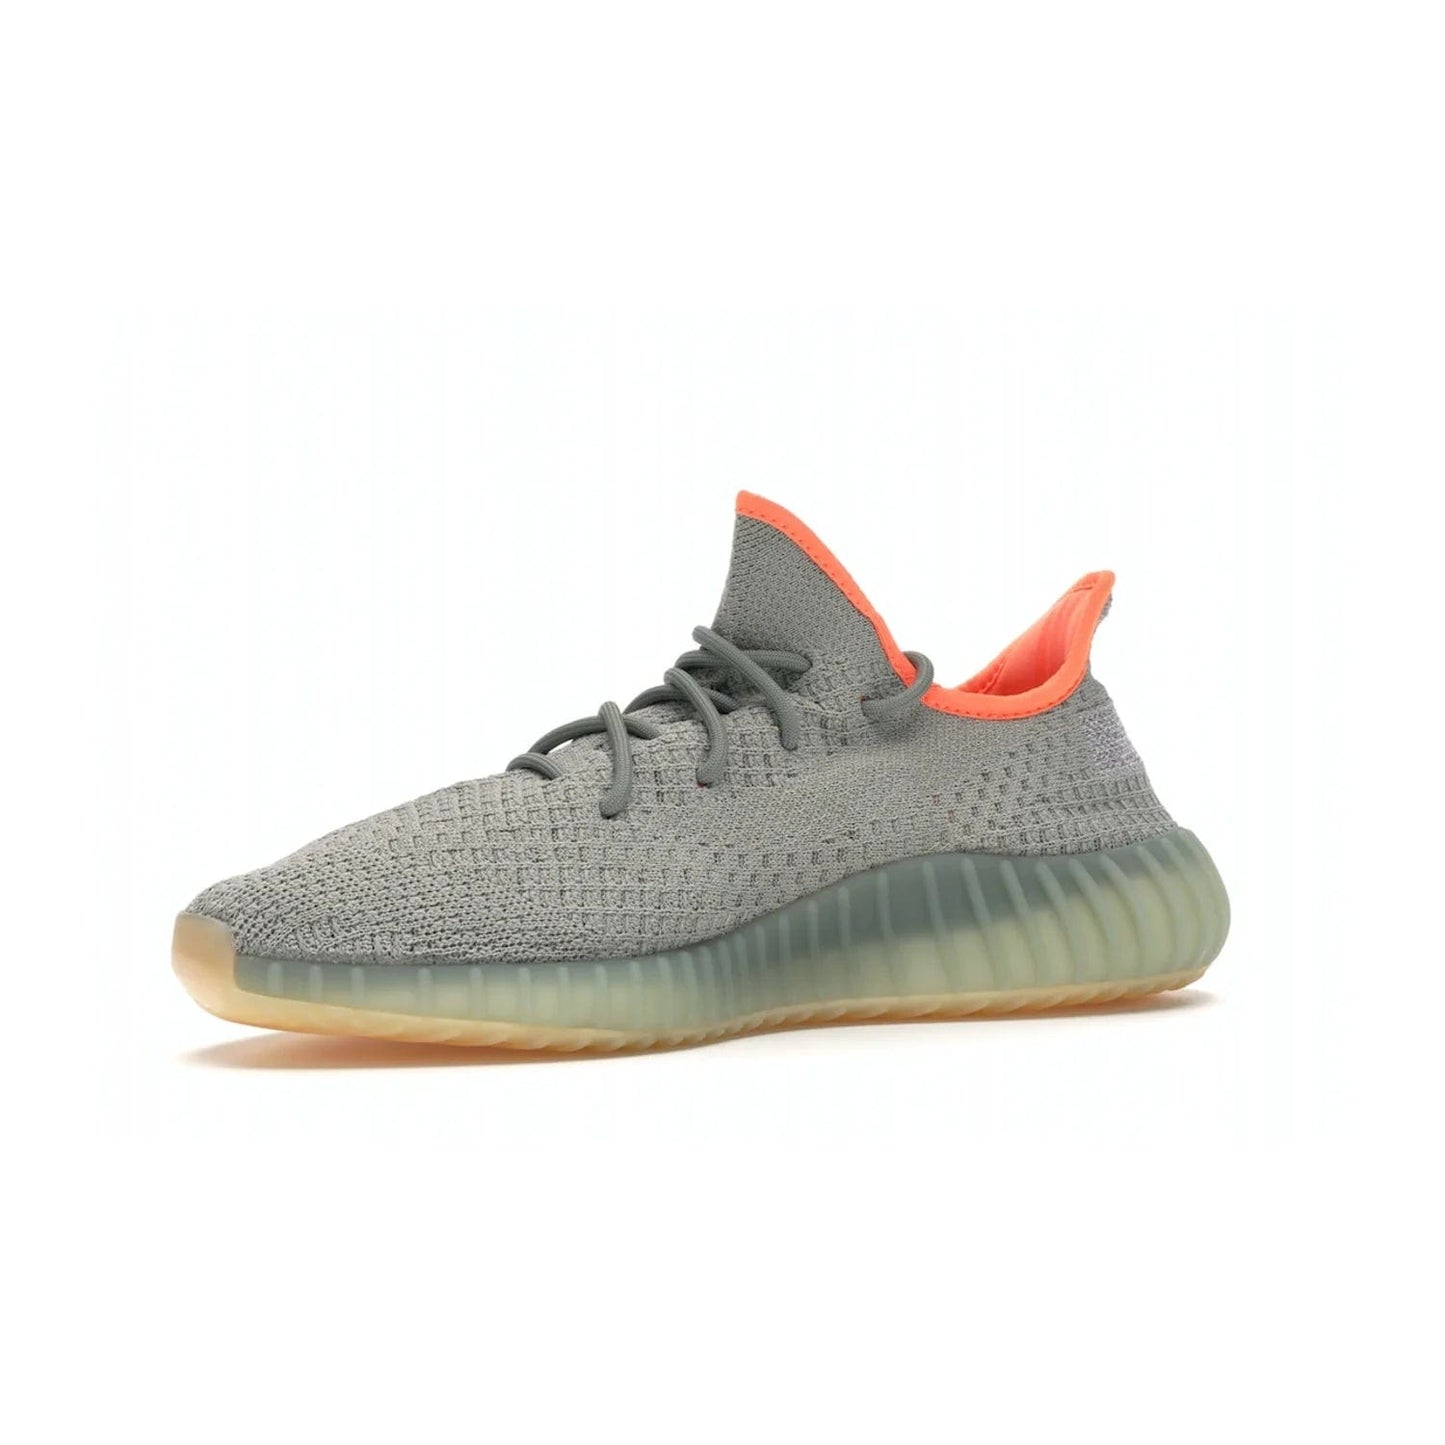 adidas Yeezy Boost 350 V2 Desert Sage - Image 16 - Only at www.BallersClubKickz.com - Upgrade your style with the adidas Yeezy Boost 350 V2 Desert Sage. This 350V2 features a Desert Sage primeknit upper with tonal side stripe, and an orange-highlighted translucent Boost cushioning sole. Stay on-trend in effortless style.